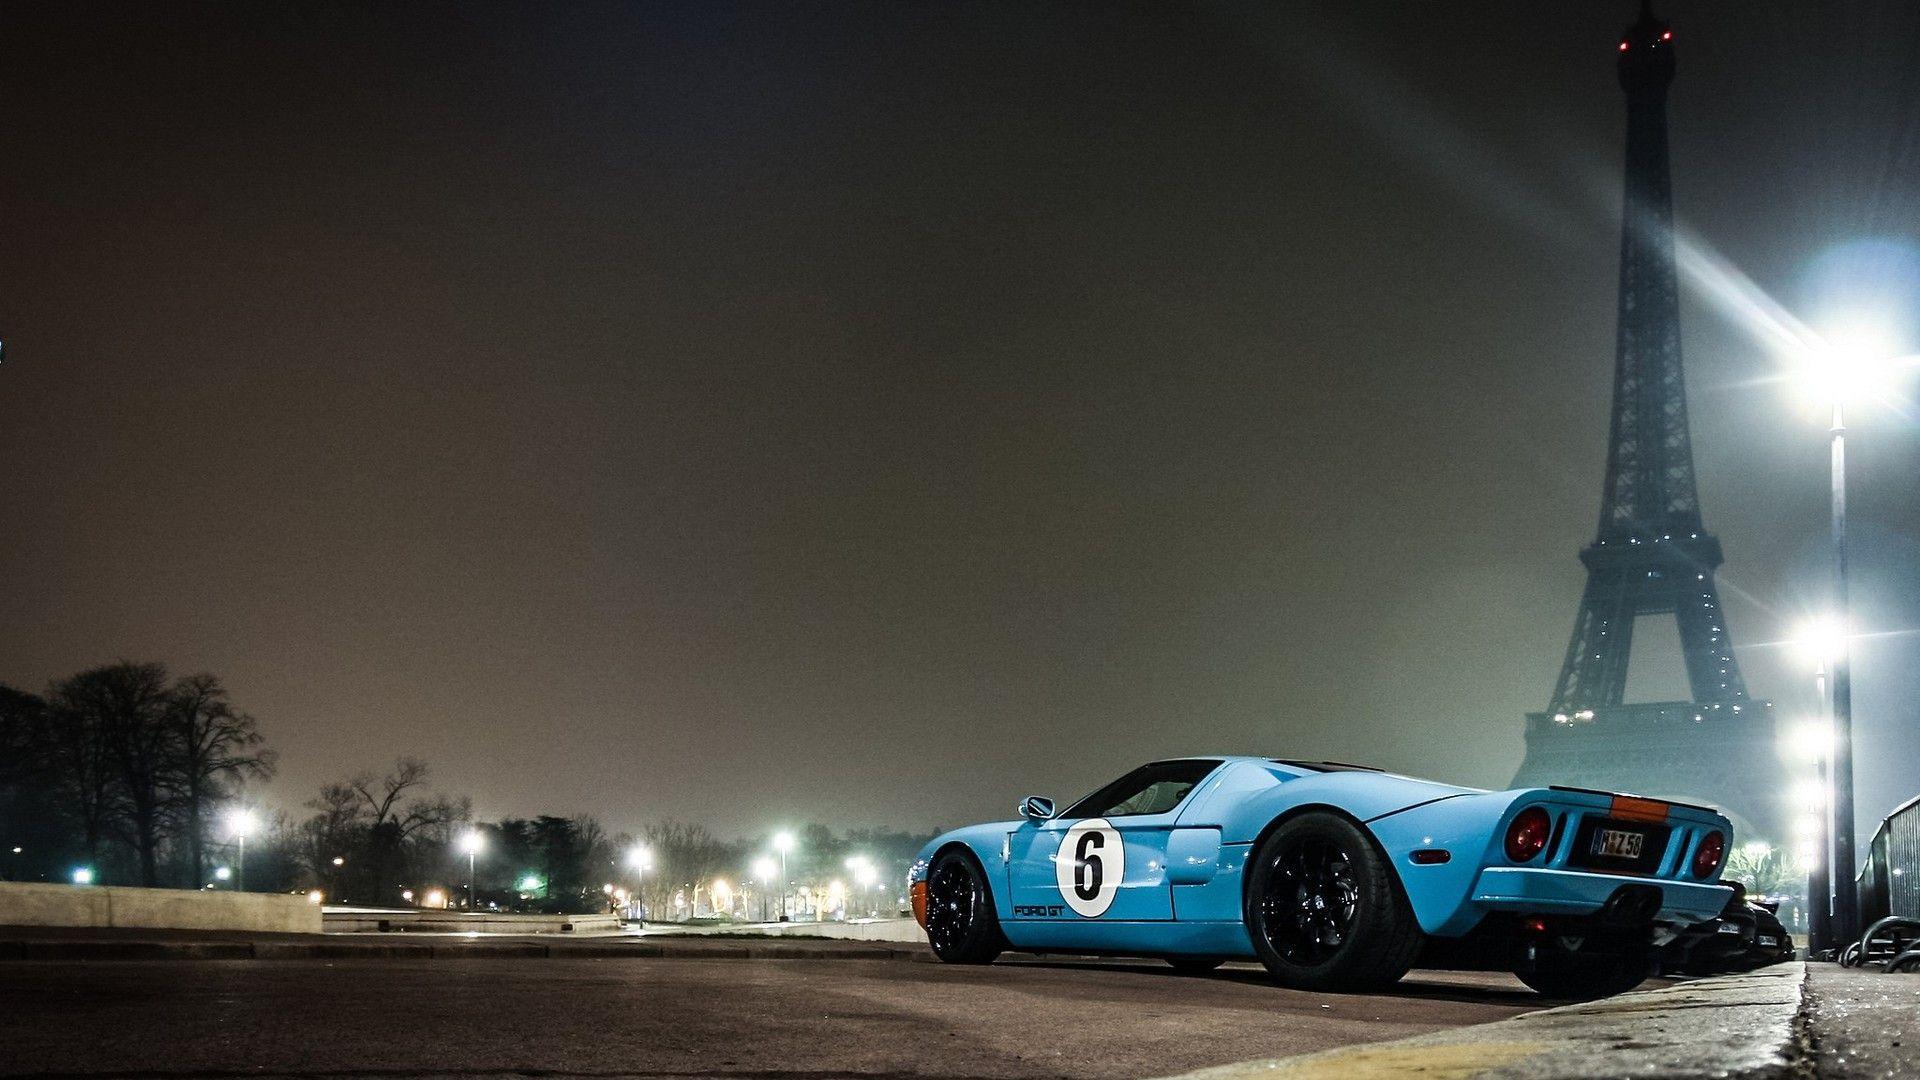 Wallpaper.wiki Eiffel Tower Paris Ford Gt Gt40 Low Angle Shot